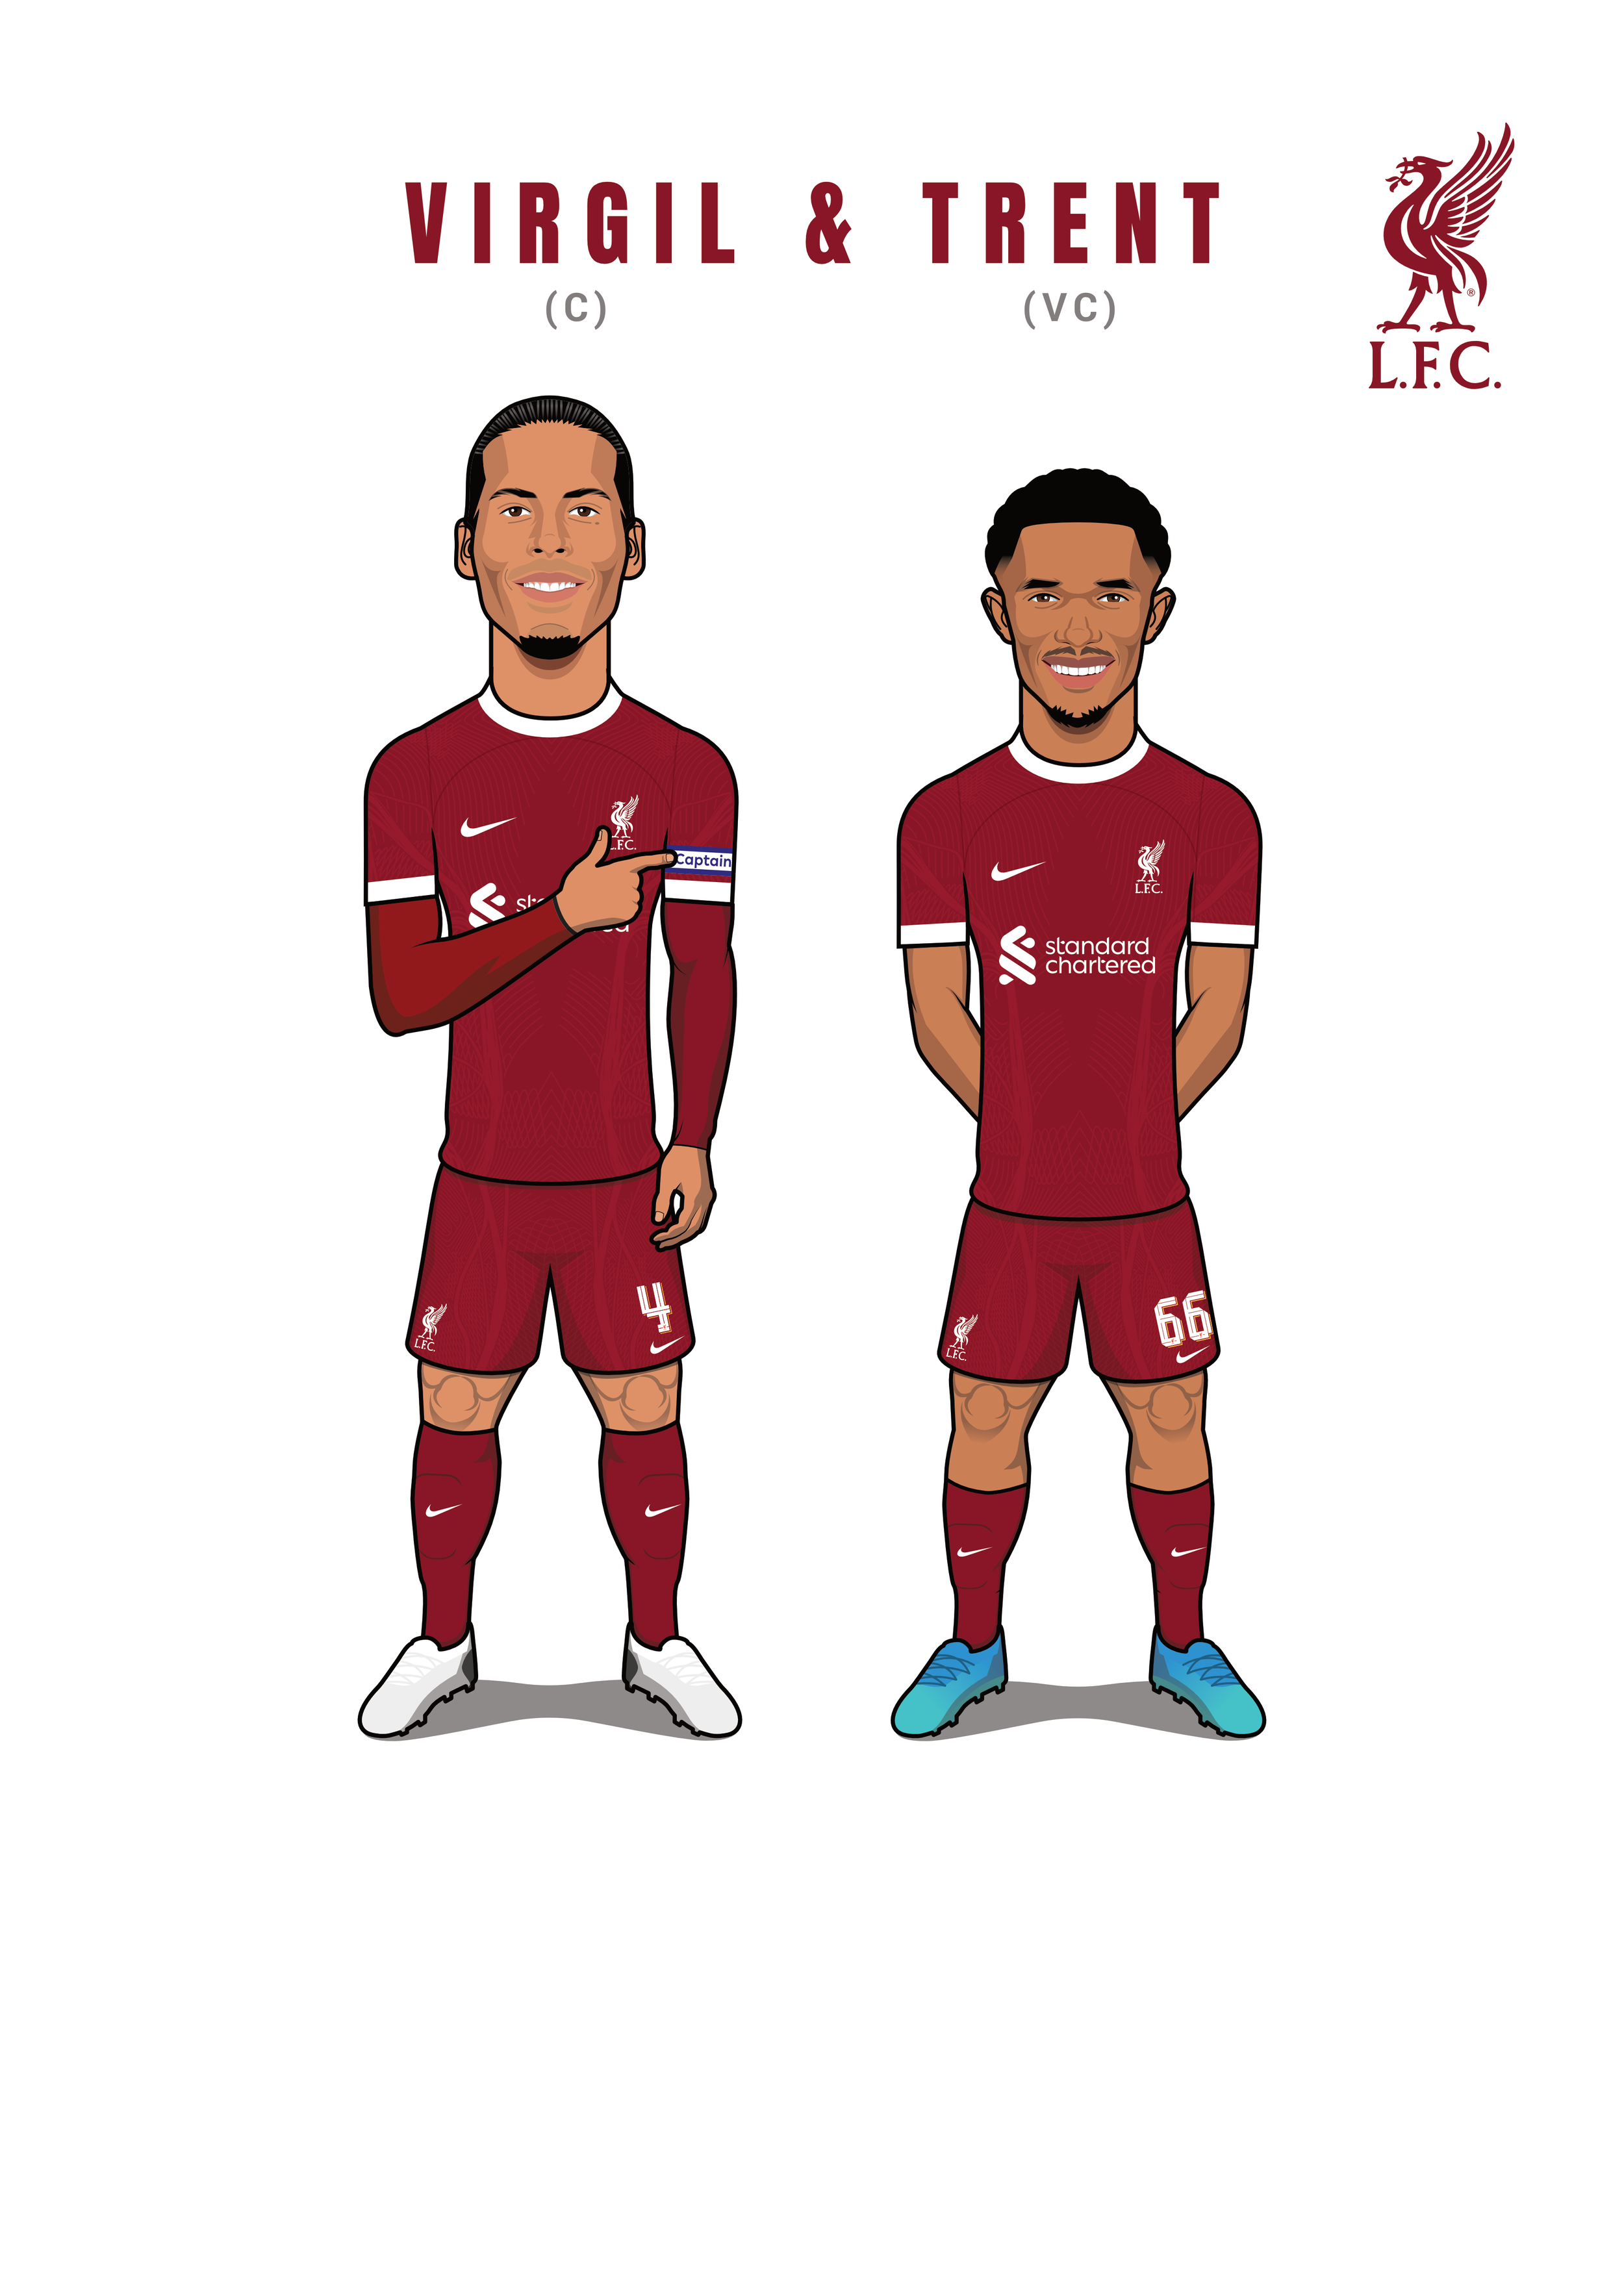 LFC Signed Players Virg & Trent.png